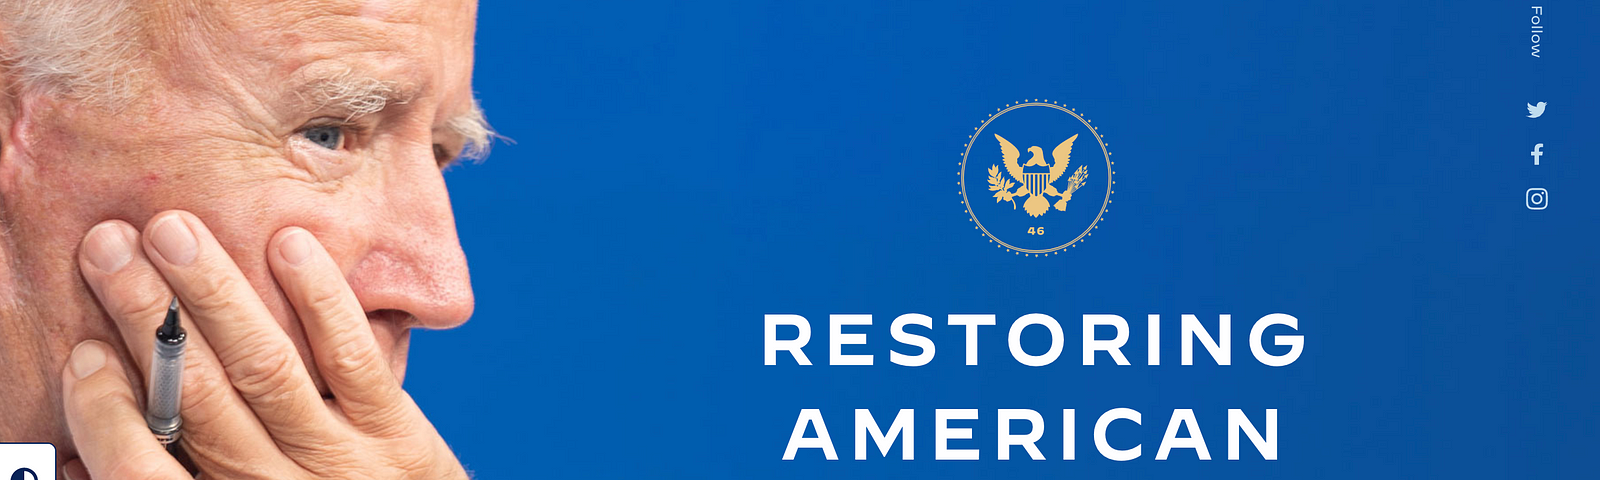 Biden with headline that reads “Restoring American Leadership” on the Landing page of the Biden/Harris Transition 46 website.